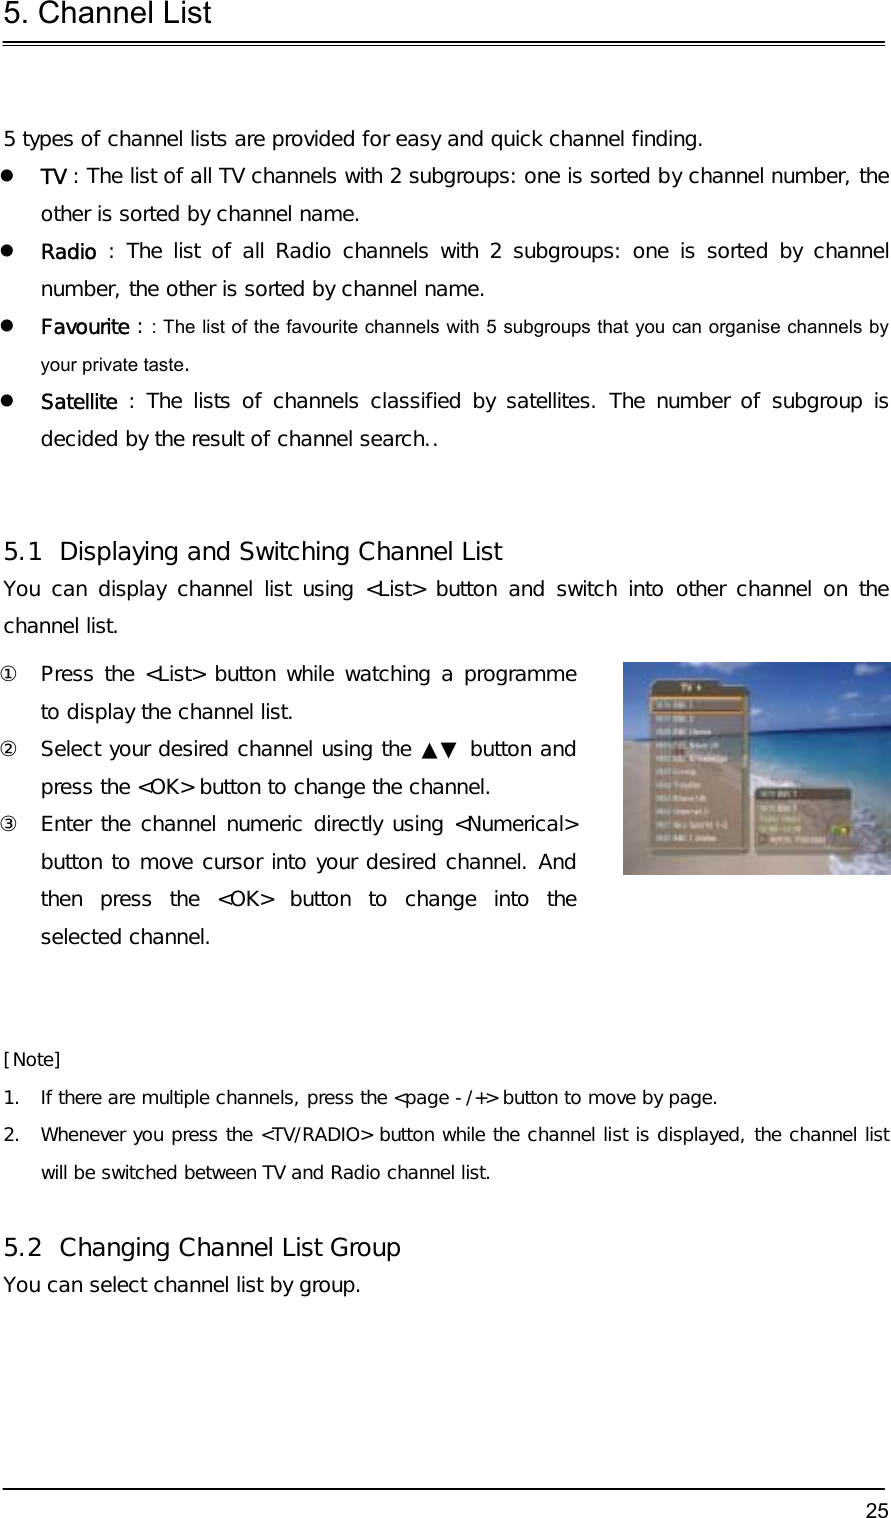 5. Channel List  25 5 types of channel lists are provided for easy and quick channel finding.   TV : The list of all TV channels with 2 subgroups: one is sorted by channel number, the other is sorted by channel name.   Radio : The list of all Radio channels with 2 subgroups: one is sorted by channel number, the other is sorted by channel name.   Favourite : : The list of the favourite channels with 5 subgroups that you can organise channels by your private taste.   Satellite : The lists of channels classified by satellites. The number of subgroup is decided by the result of channel search..   5.1  Displaying and Switching Channel List You can display channel list using &lt;List&gt; button and switch into other channel on the channel list. ①  Press the &lt;List&gt; button while watching a programme to display the channel list. ②  Select your desired channel using the ▲▼ button and press the &lt;OK&gt; button to change the channel. ③  Enter the channel numeric directly using &lt;Numerical&gt; button to move cursor into your desired channel. And then press the &lt;OK&gt; button to change into the selected channel.   [Note] 1.  If there are multiple channels, press the &lt;page -/+&gt; button to move by page. 2.  Whenever you press the &lt;TV/RADIO&gt; button while the channel list is displayed, the channel list will be switched between TV and Radio channel list.   5.2  Changing Channel List Group You can select channel list by group. 